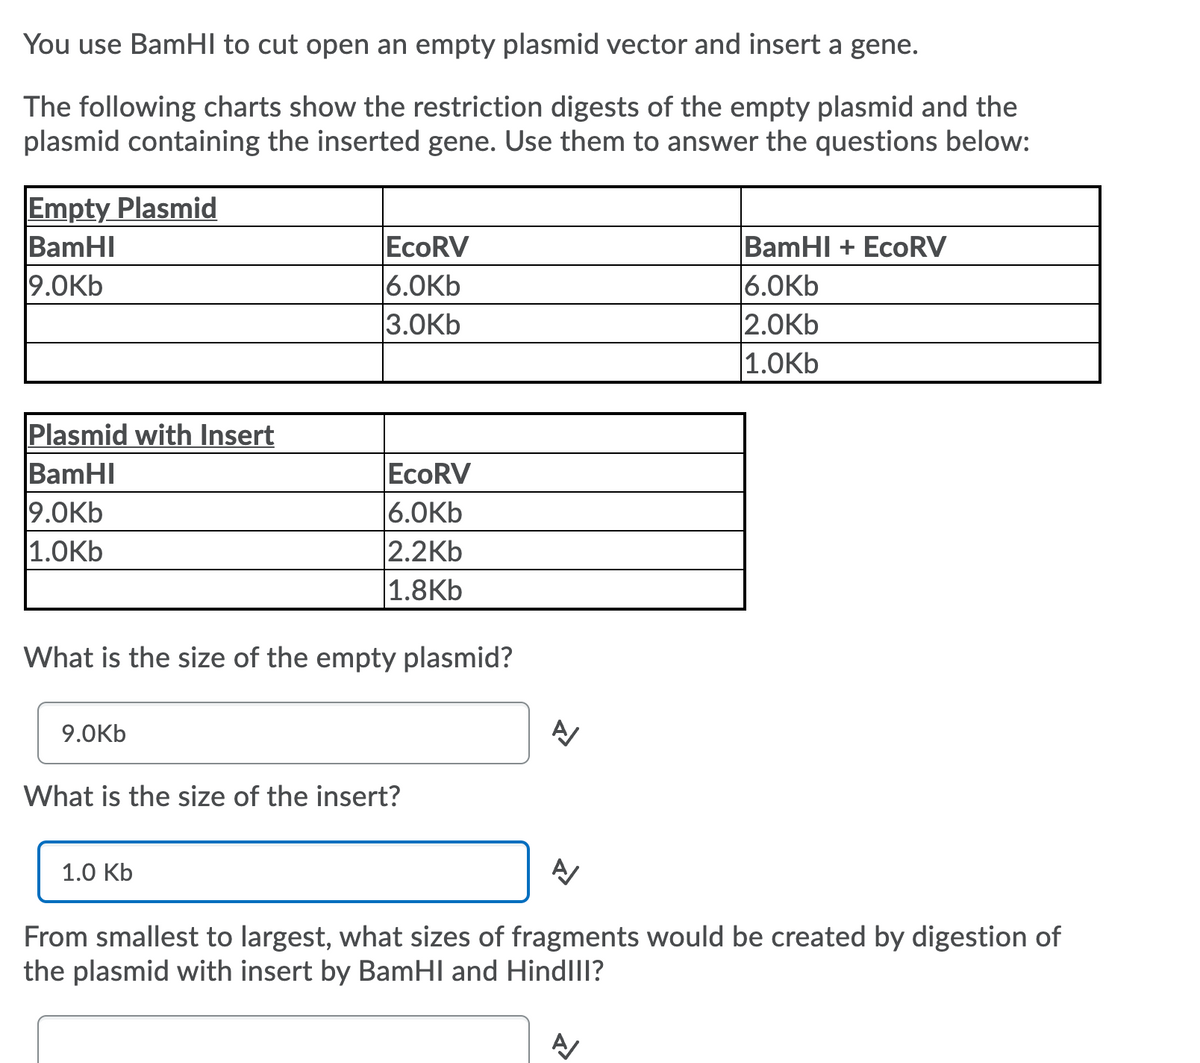 You use BamHI to cut open an empty plasmid vector and insert a gene.
The following charts show the restriction digests of the empty plasmid and the
plasmid containing the inserted gene. Use them to answer the questions below:
Empty Plasmid
BamHI
9.0Kb
EcoRV
6.0Kb
3.0Kb
BamHI + EcoRV
6.0Kb
2.0Kb
|1.0Kb
Plasmid with Insert
BamHI
9.0Kb
|1.ОКЬ
EcoRV
6.0Kb
2.2Kb
1.8Kb
What is the size of the empty plasmid?
9.0Kb
What is the size of the insert?
1.0 KЬ
From smallest to largest, what sizes of fragments would be created by digestion of
the plasmid with insert by BamHI and Hindll1?
